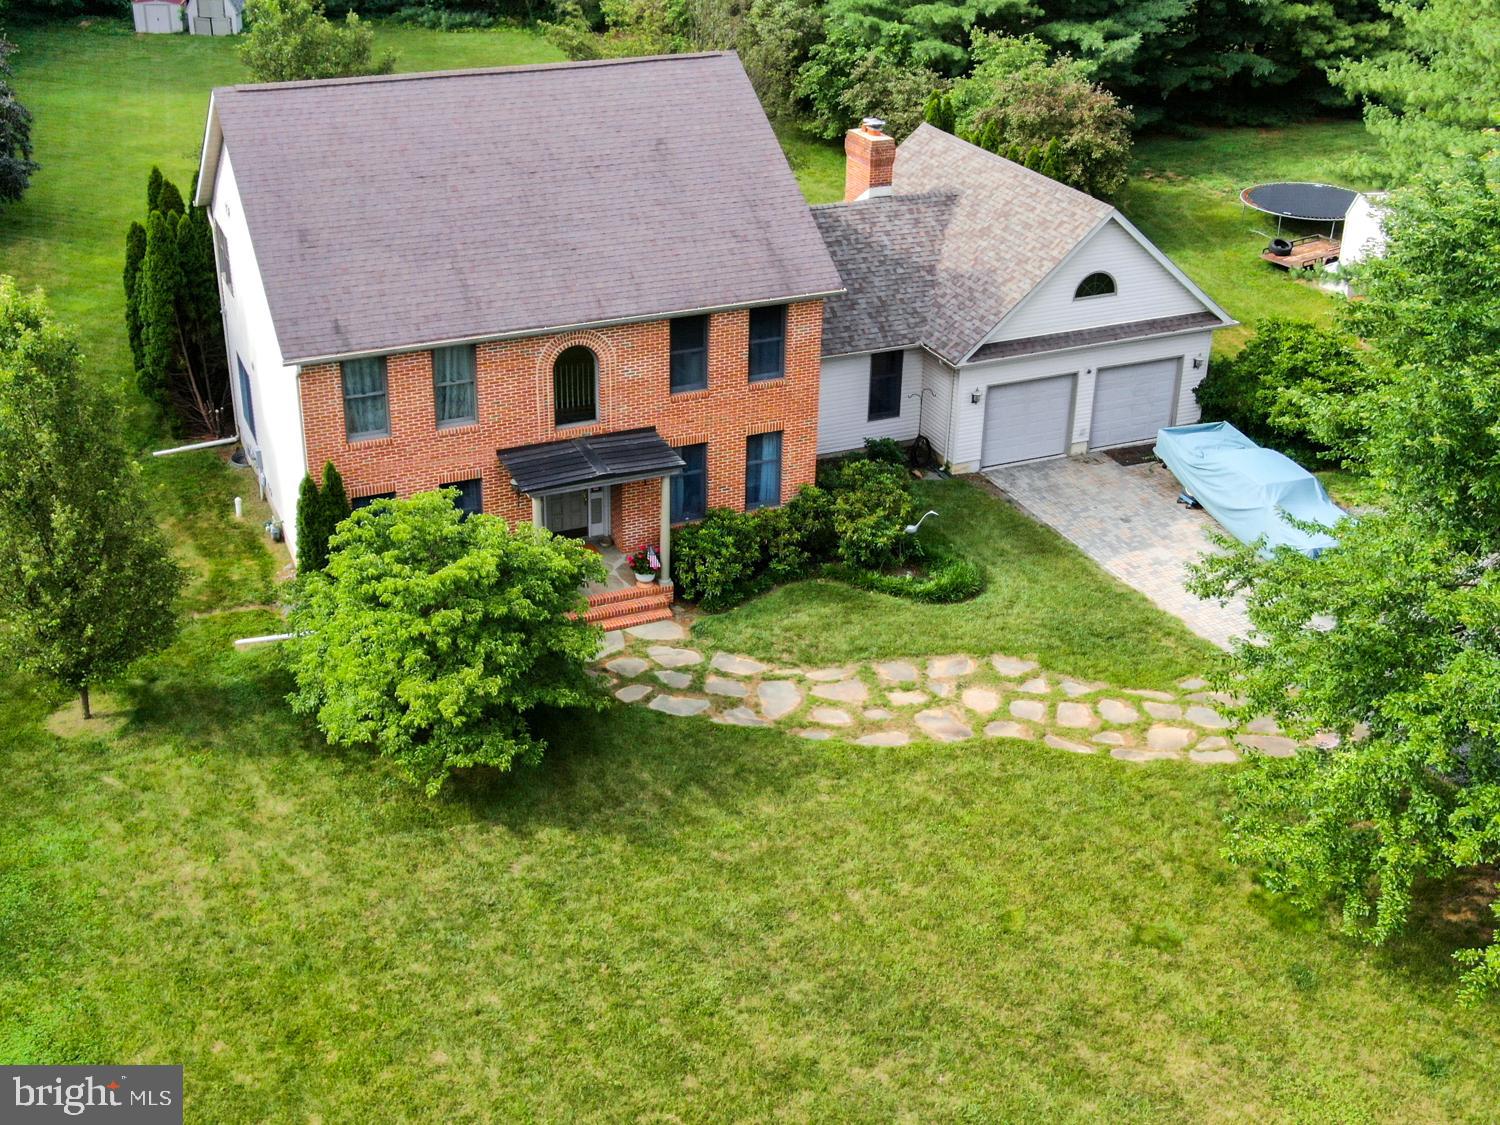 a aerial view of a house next to a big yard and large trees